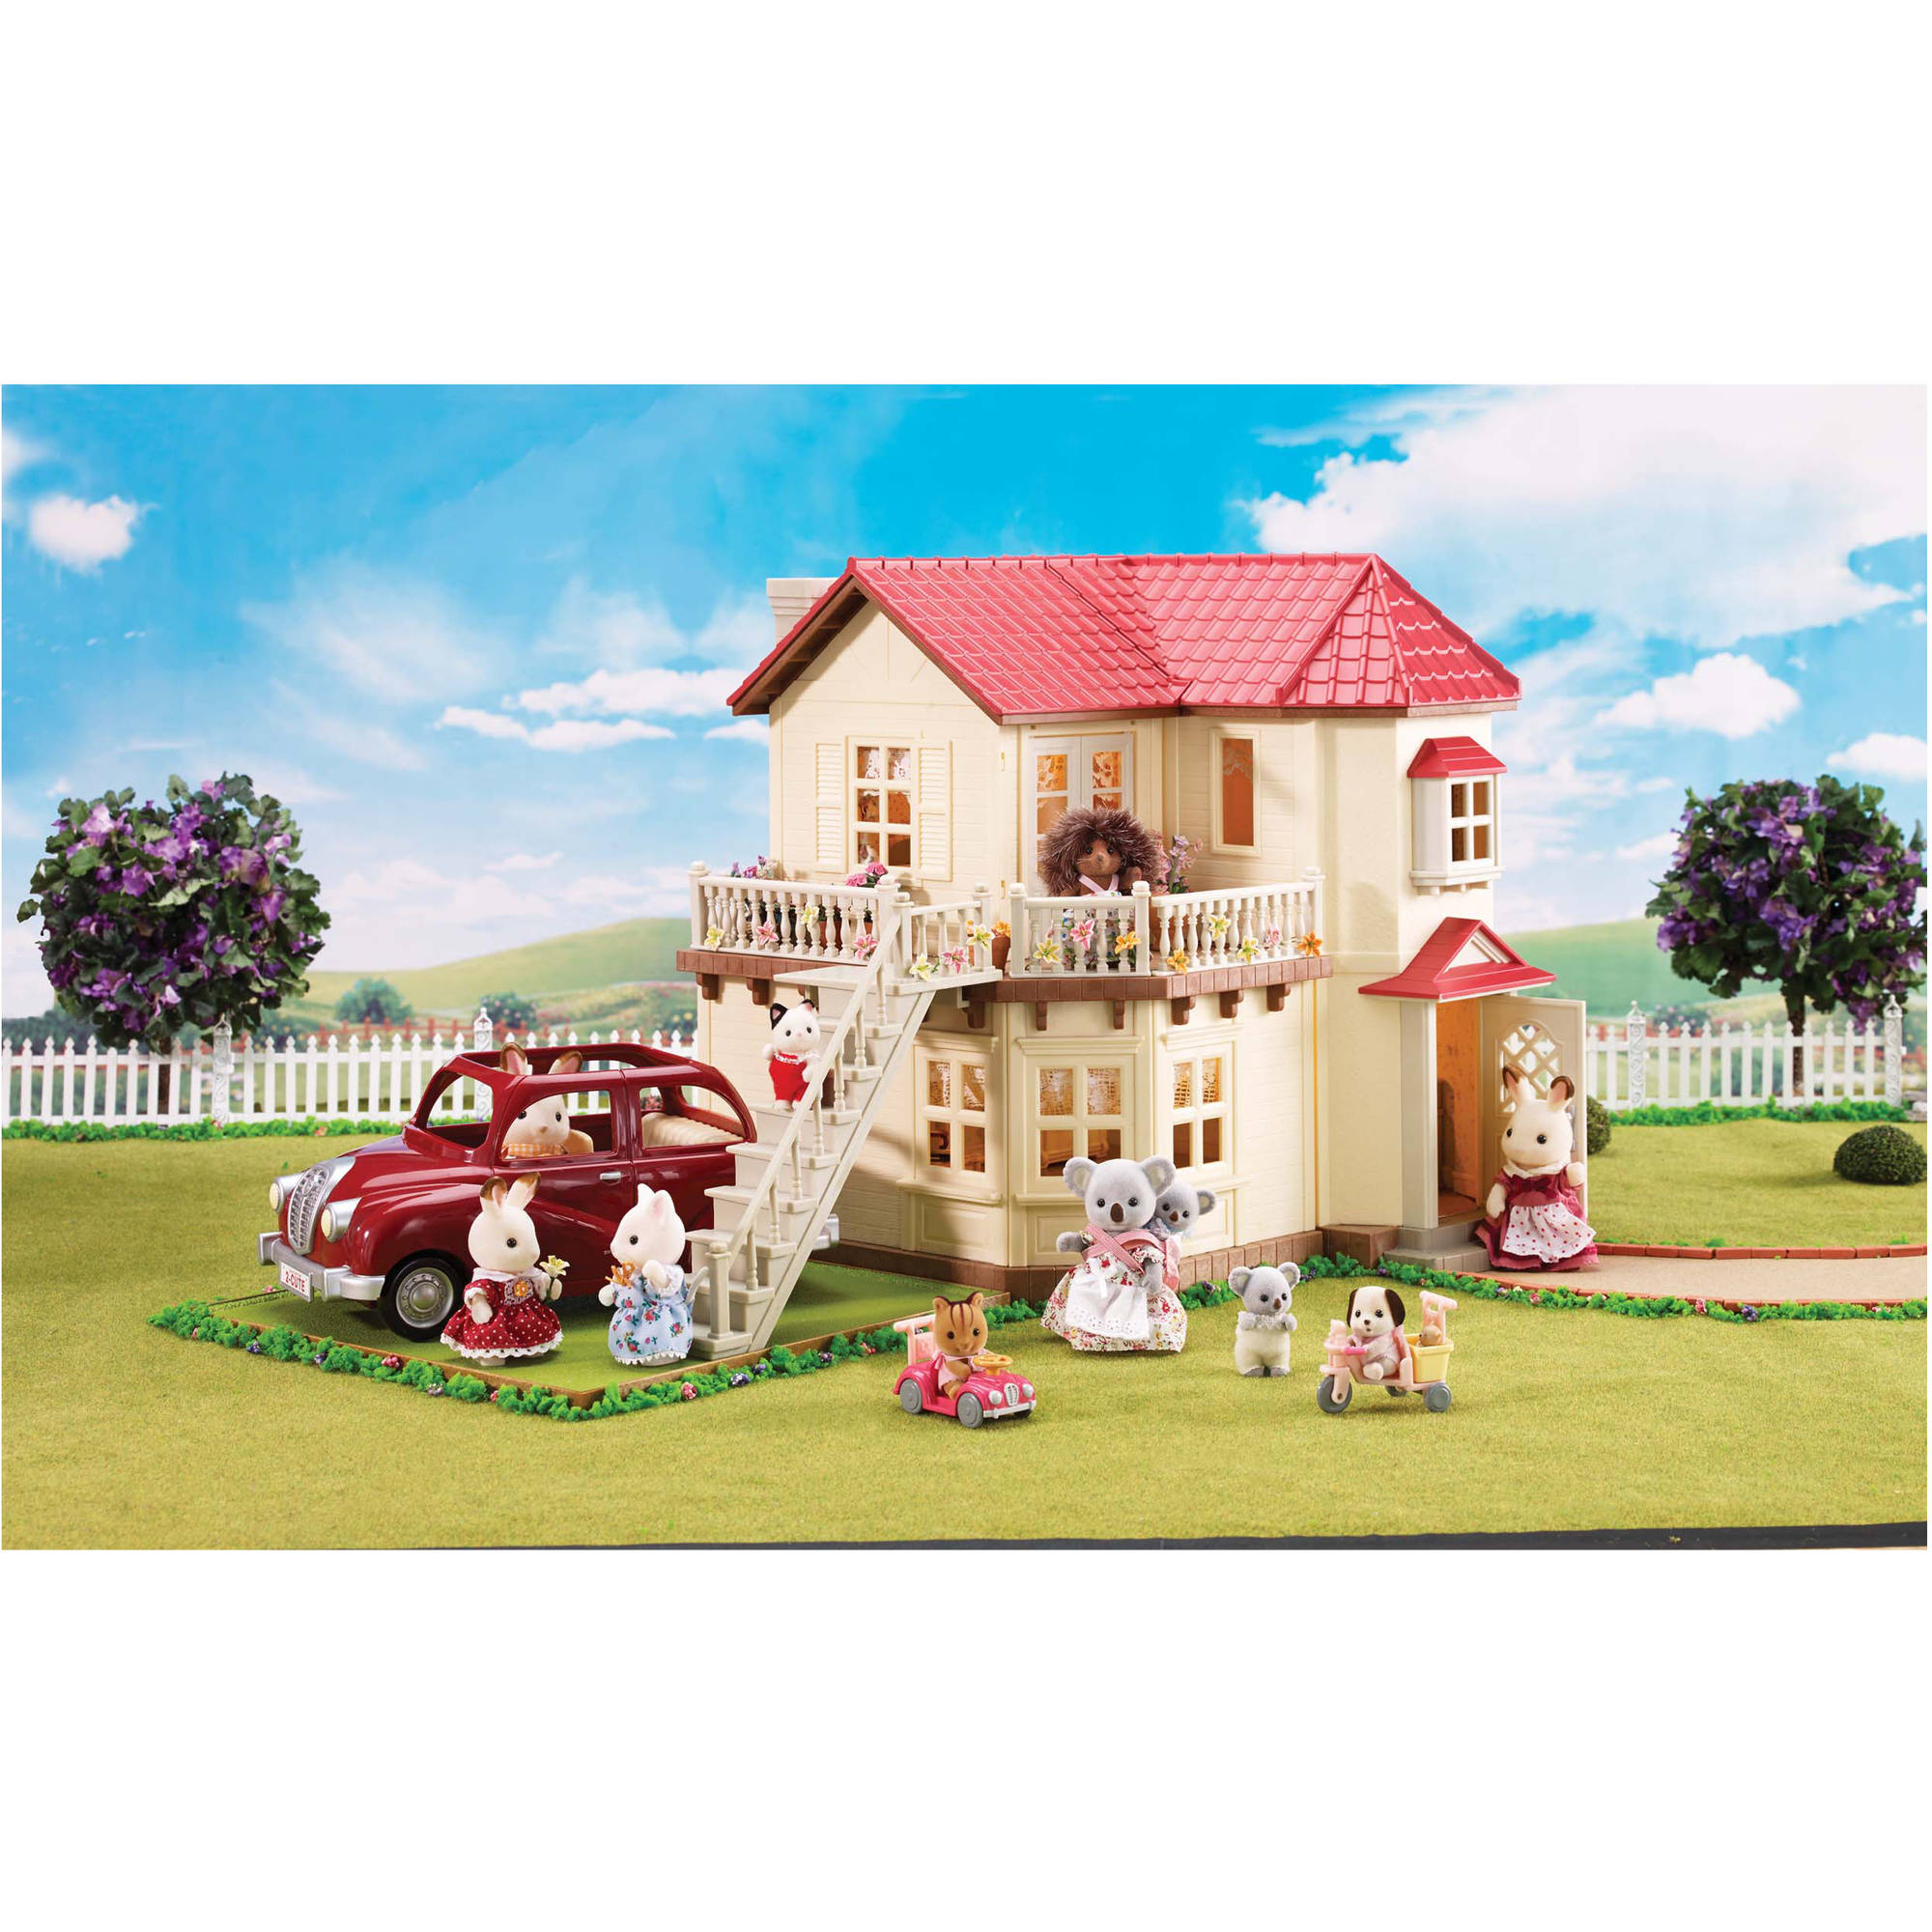 Calico Critters Luxury Townhome Gift Set - image 4 of 18